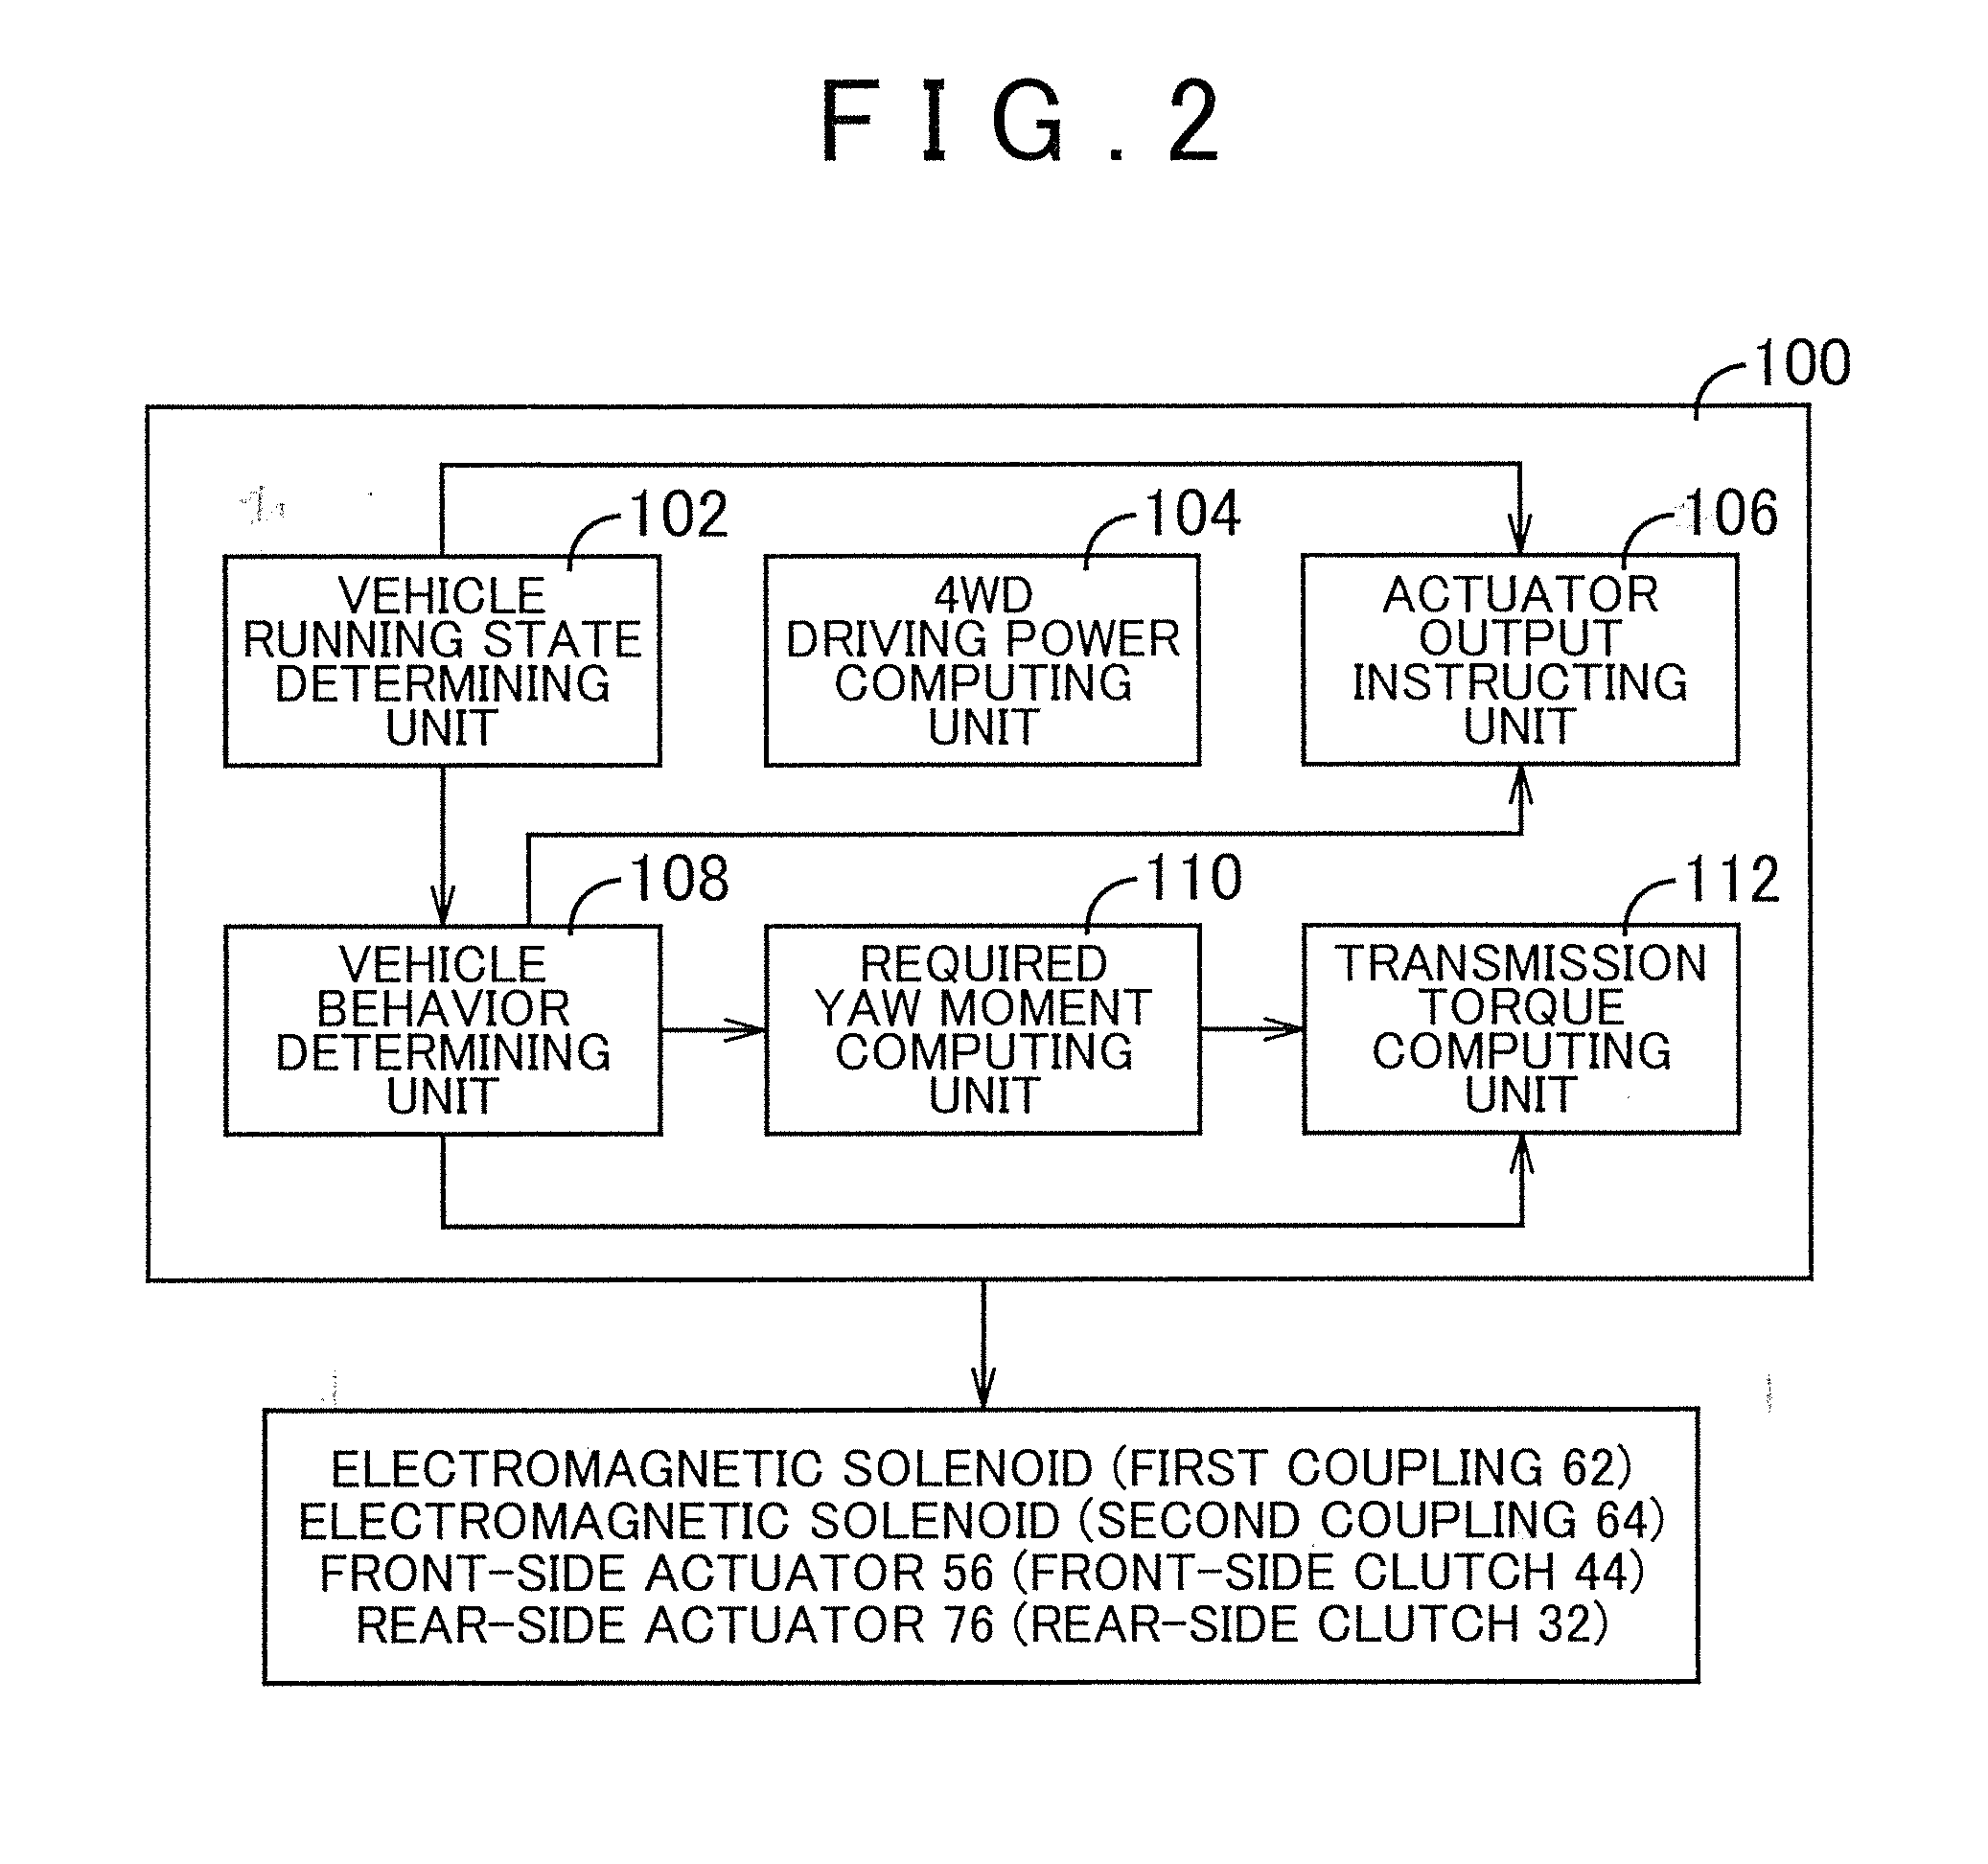 Control system for four-wheel-drive vehicle